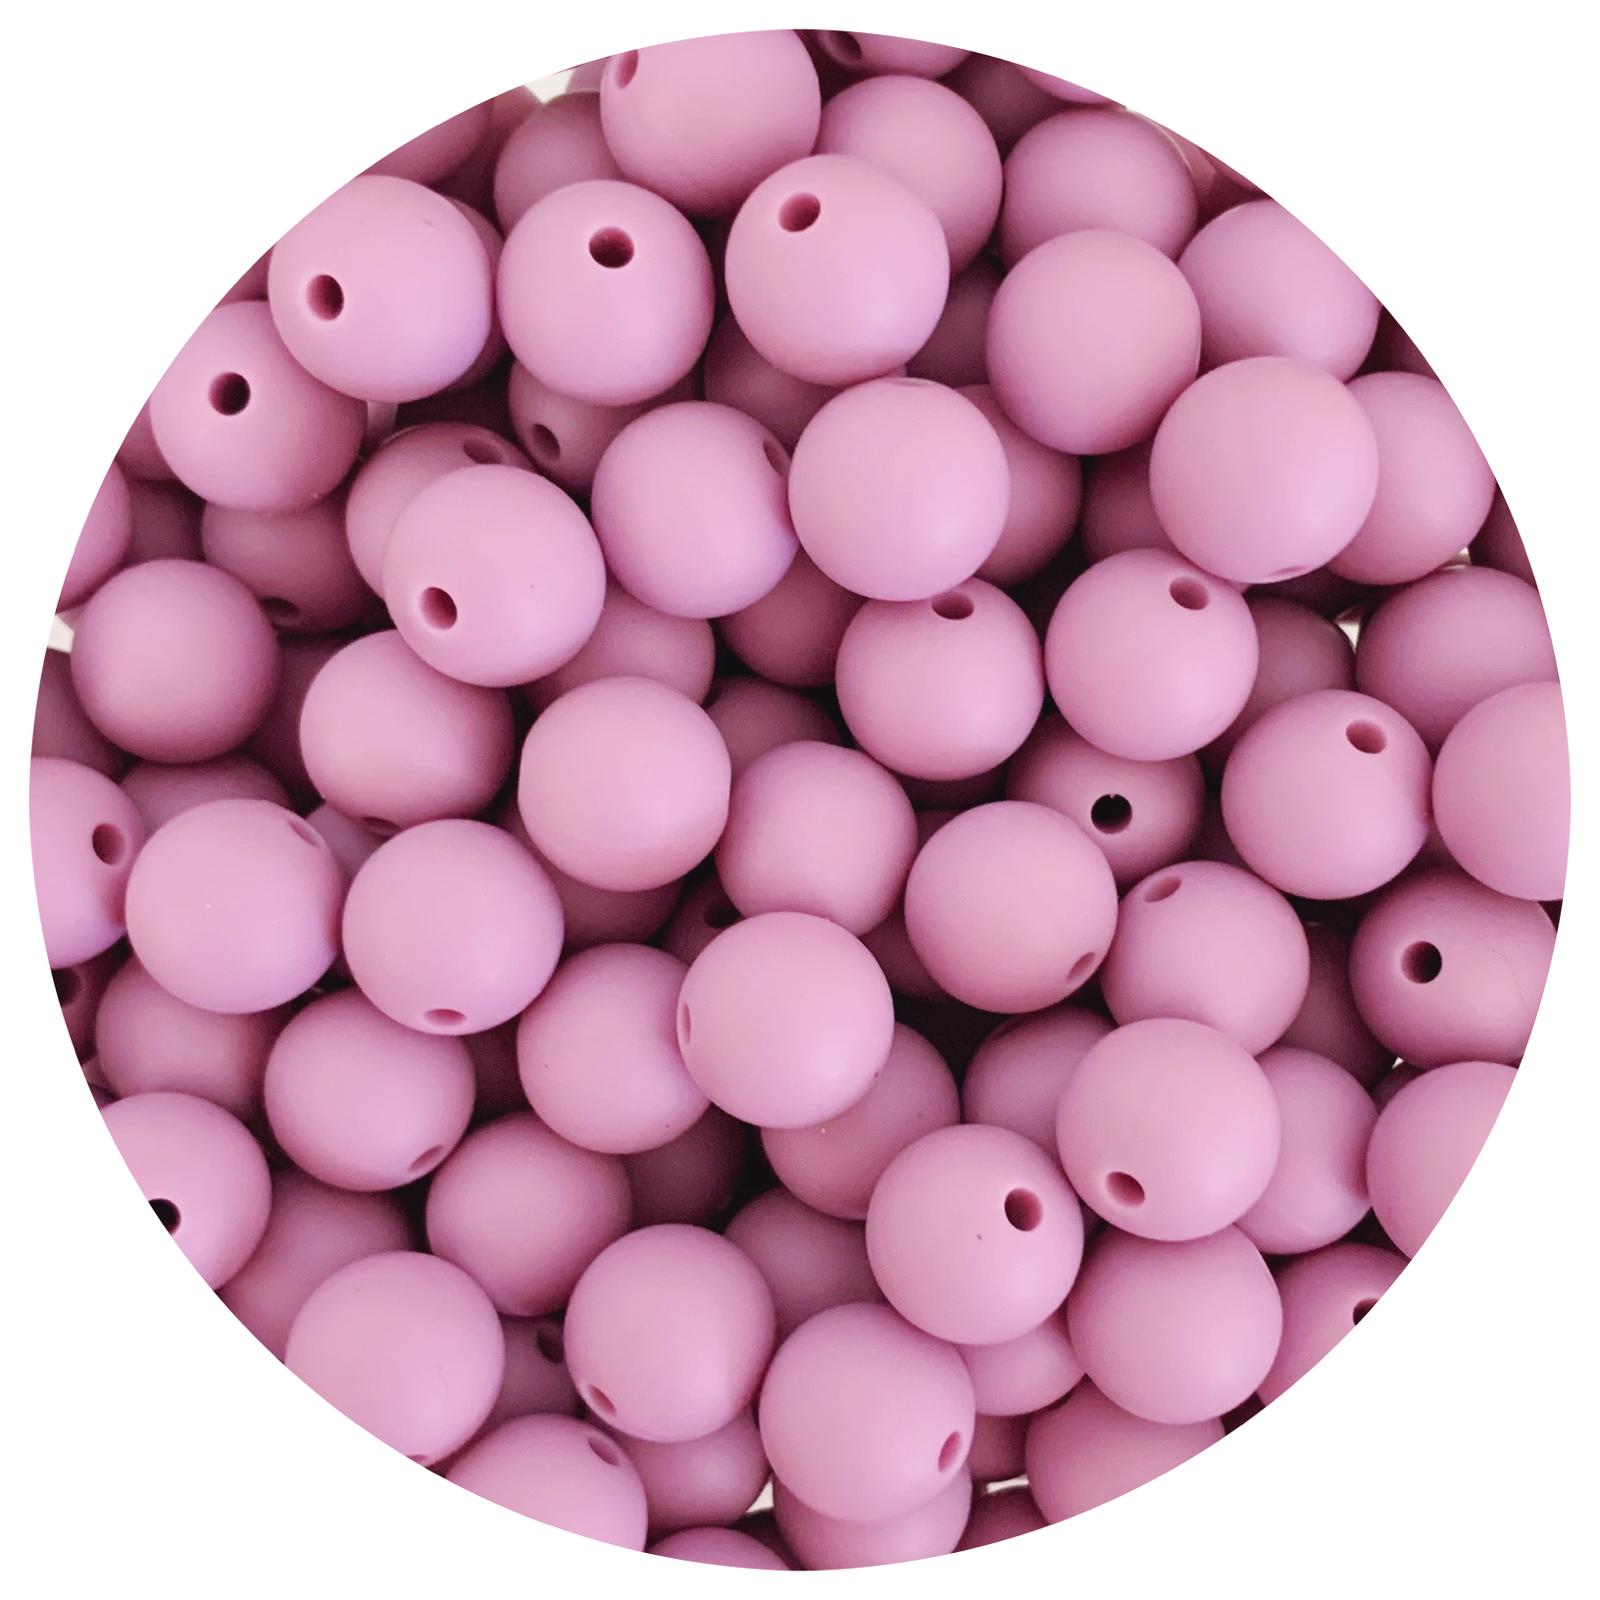 Mauve - 12mm Round Silicone Beads - 10 beads